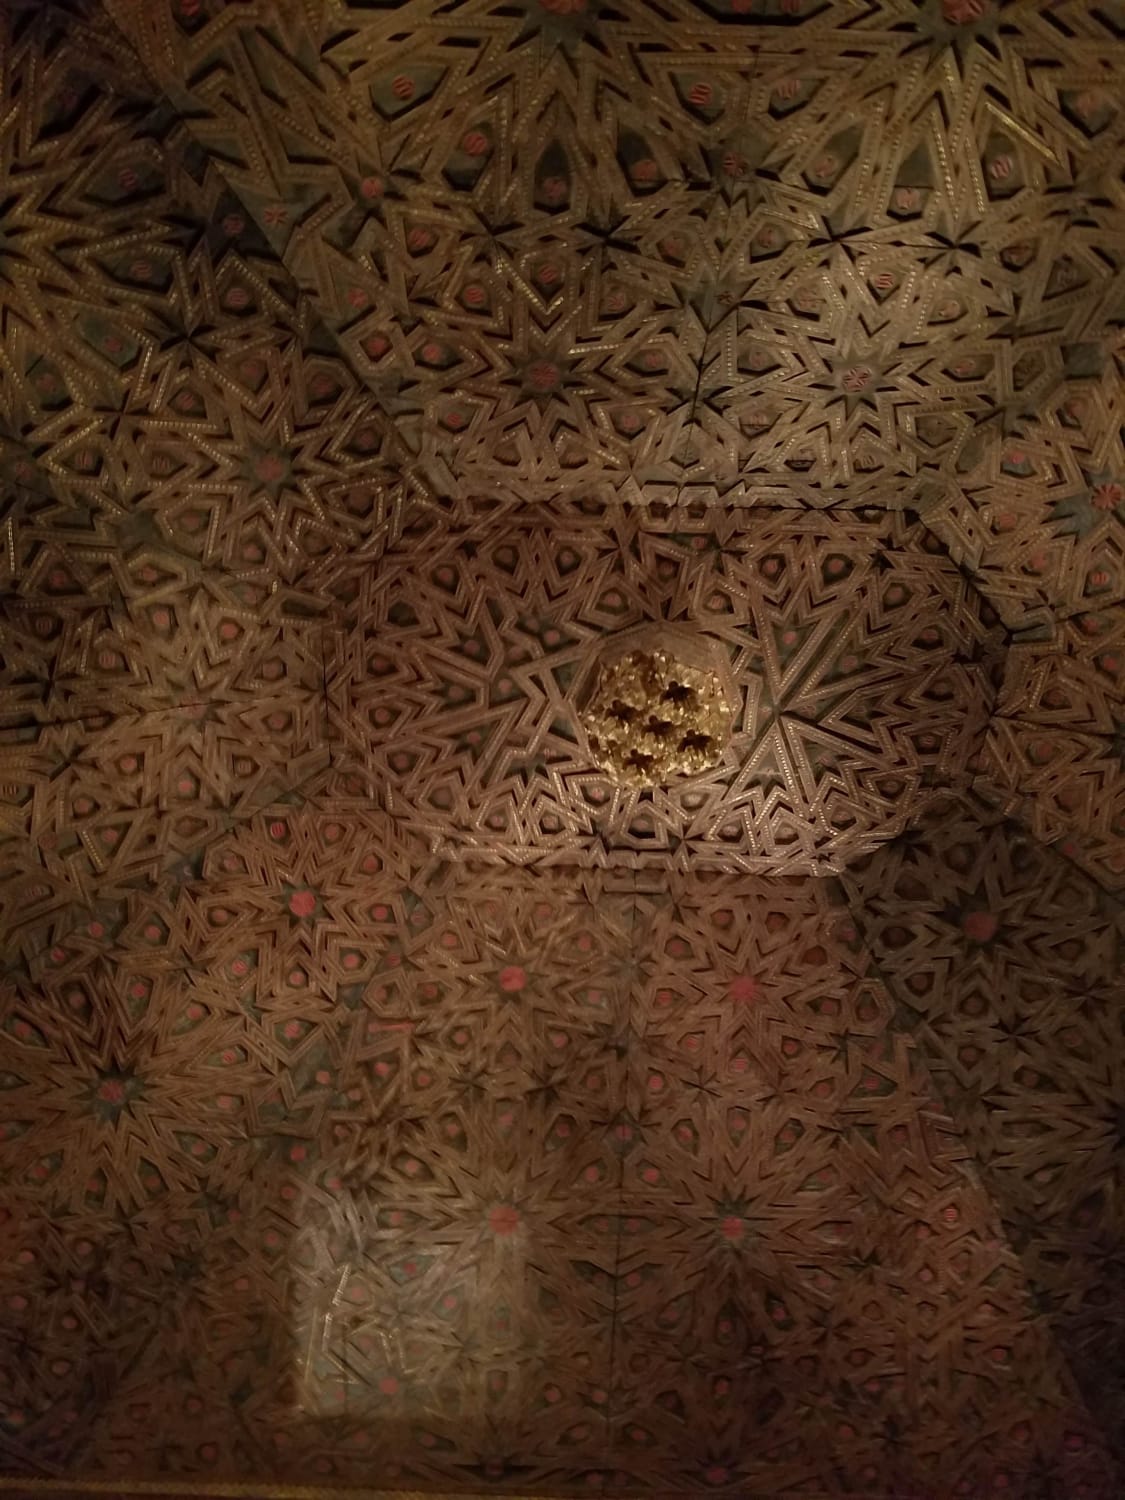 Ceiling. 16th Century. Mudéjar Style. Spain. A return to the Islamic Art Style after the Reconquista.